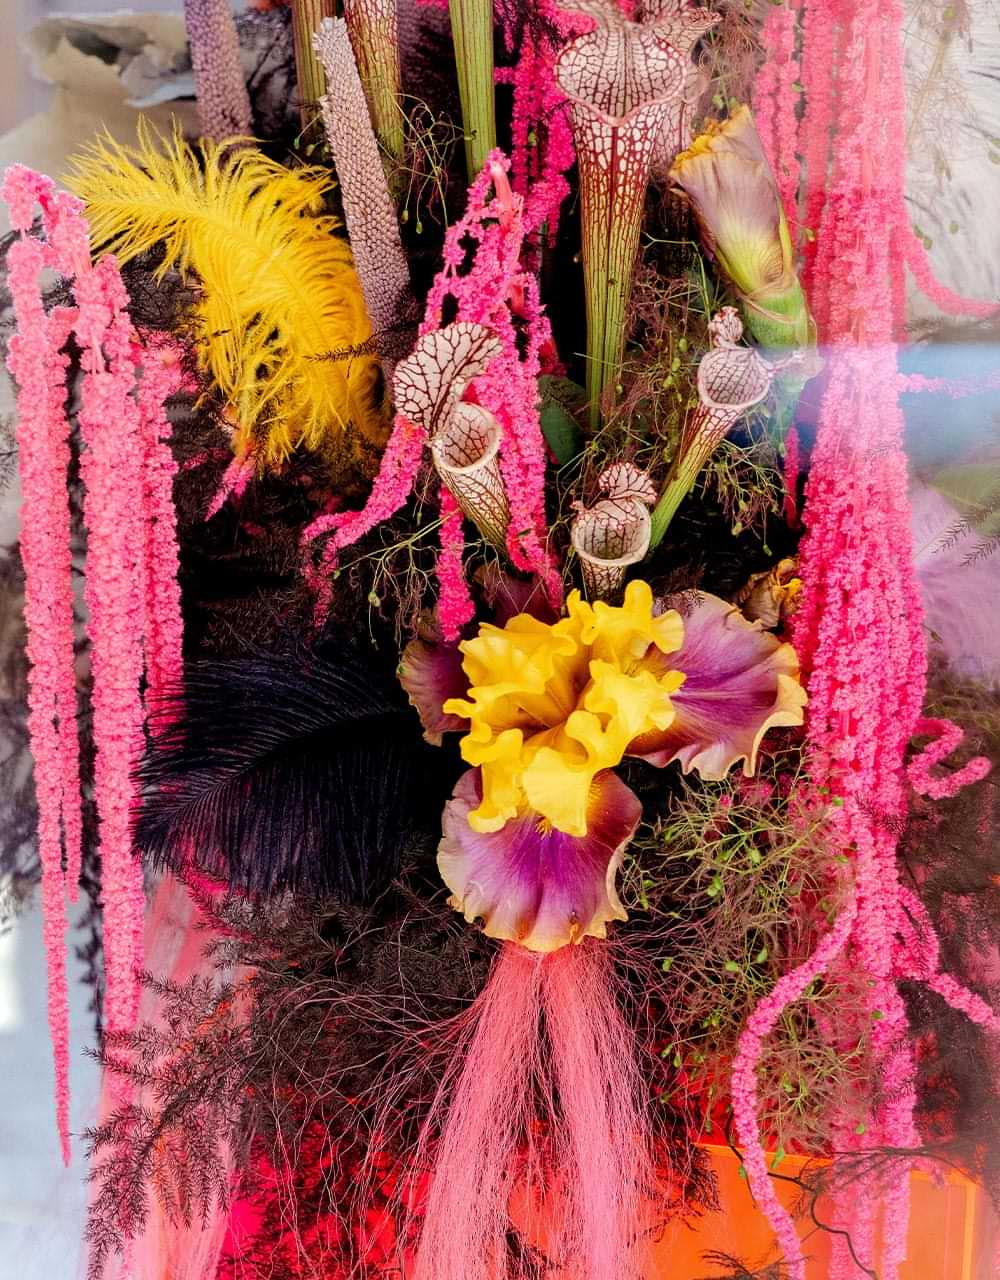 a vibrant and avant garde arrangement with exotic purple pink and yellow flowers along with along with non-floral elements